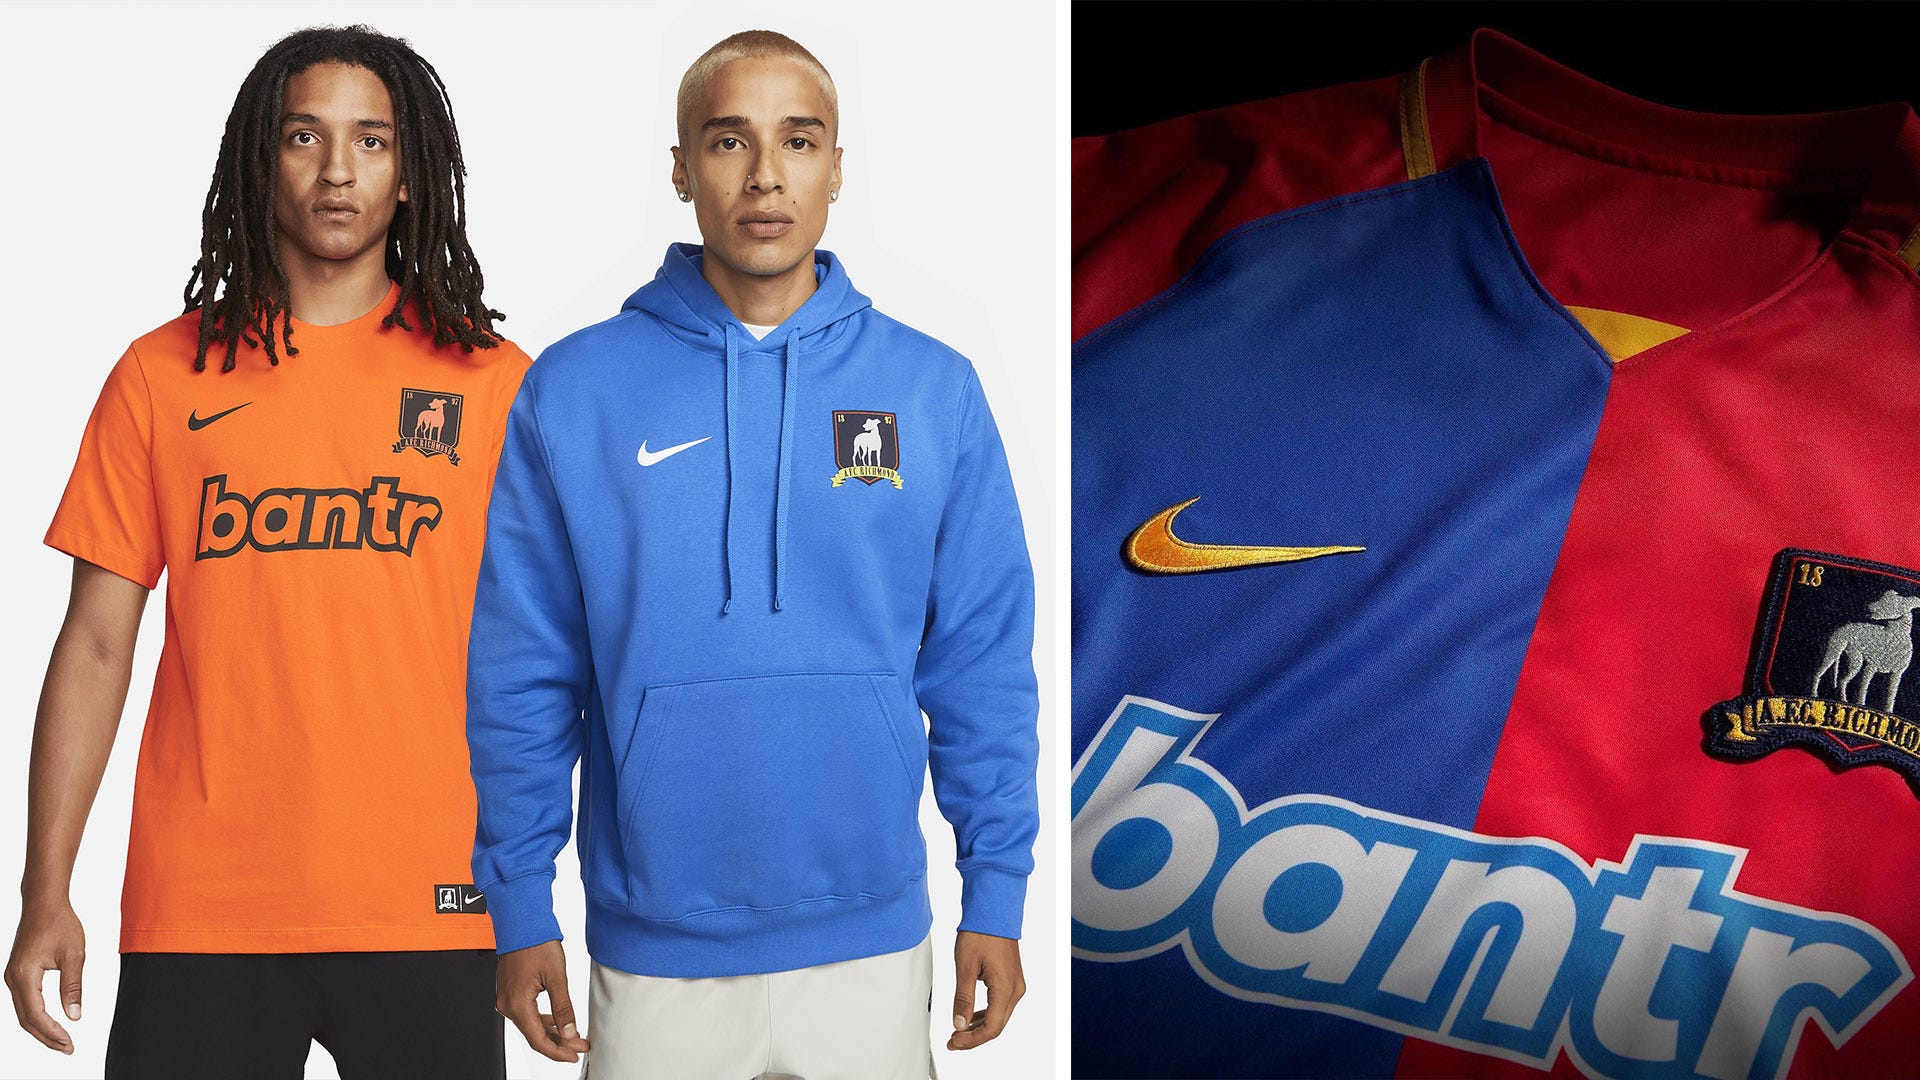 Nike AFC Richmond jerseys and the Nike Ted Lasso collection are